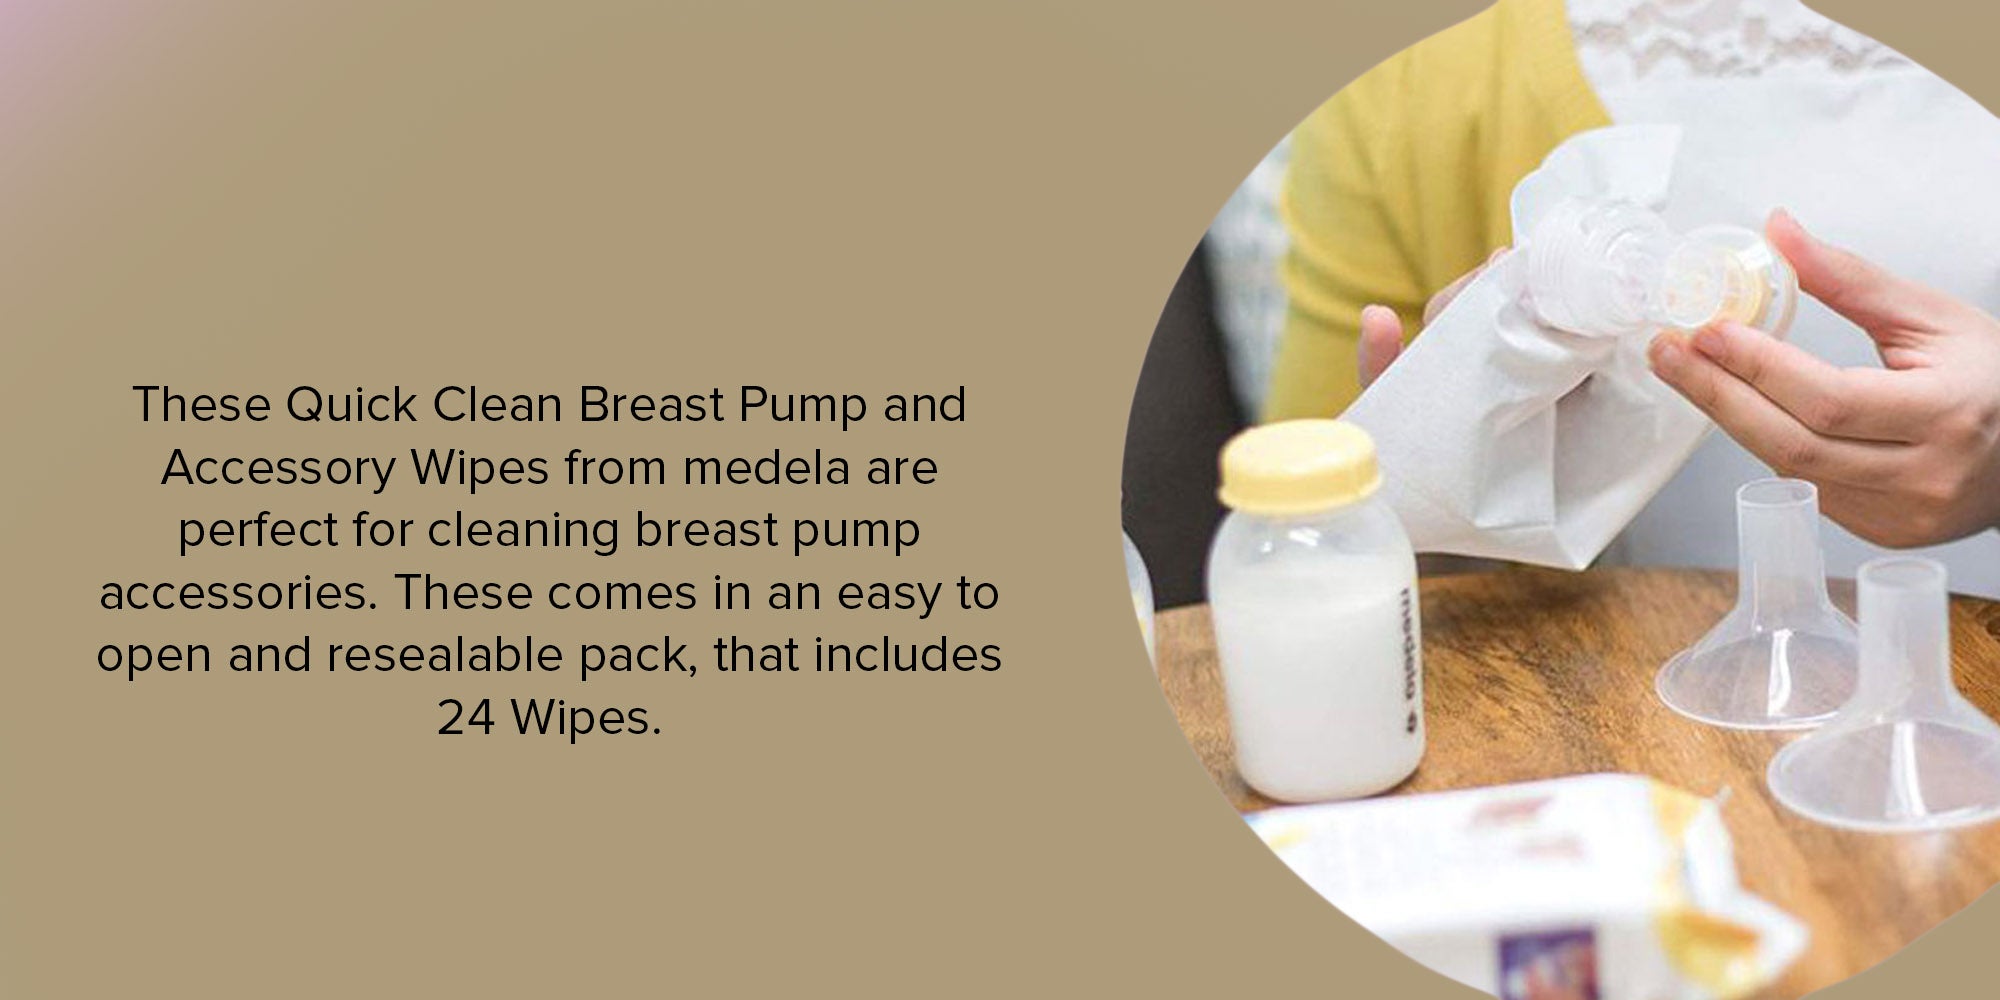  Medela Quick Clean Breast Pump And Accessory Wipes